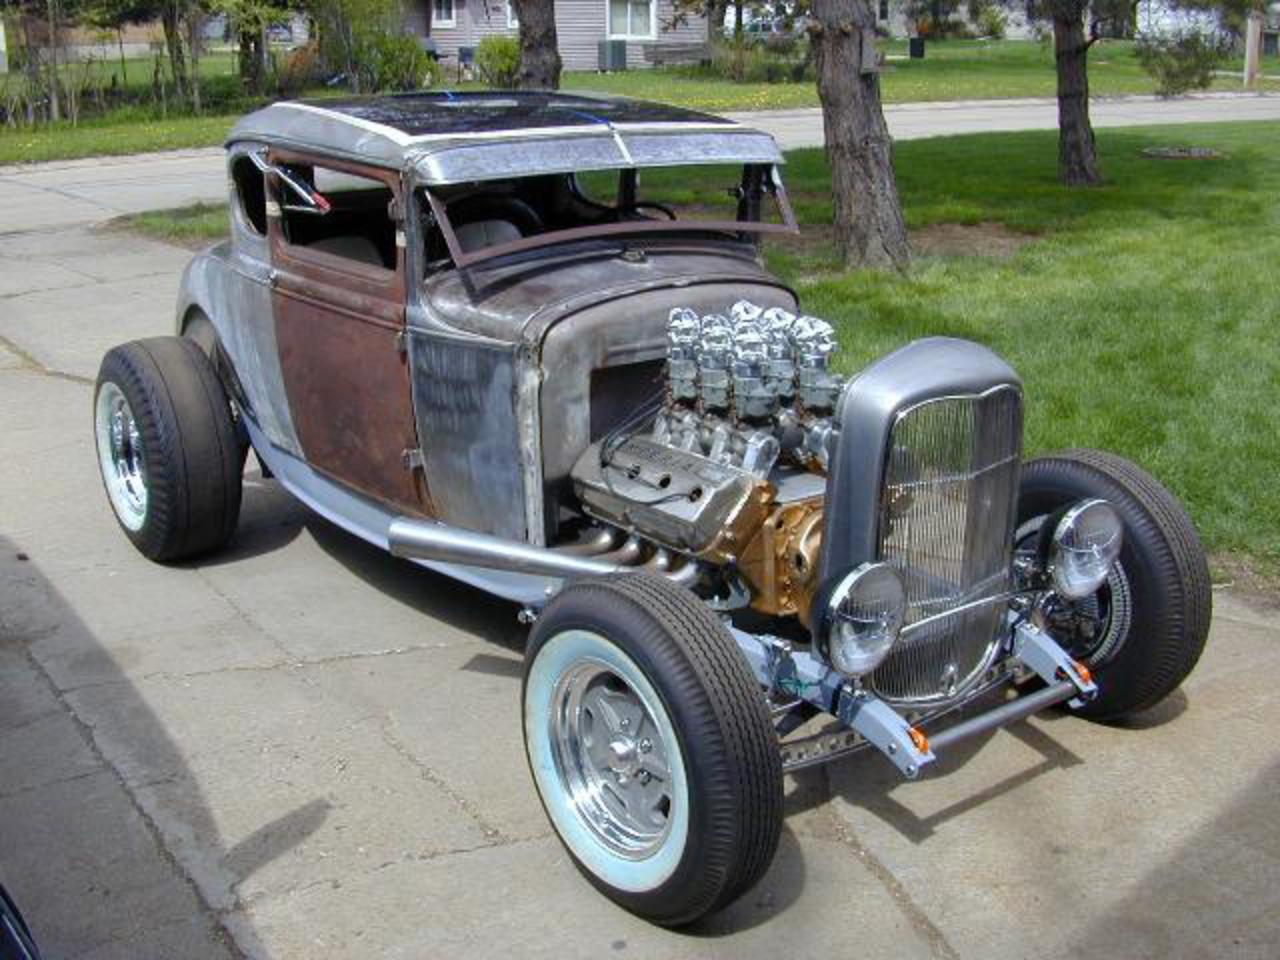 Bill Wonder's '31 Ford 5-Window Coupe. After selling the Pro Street '31 Ford